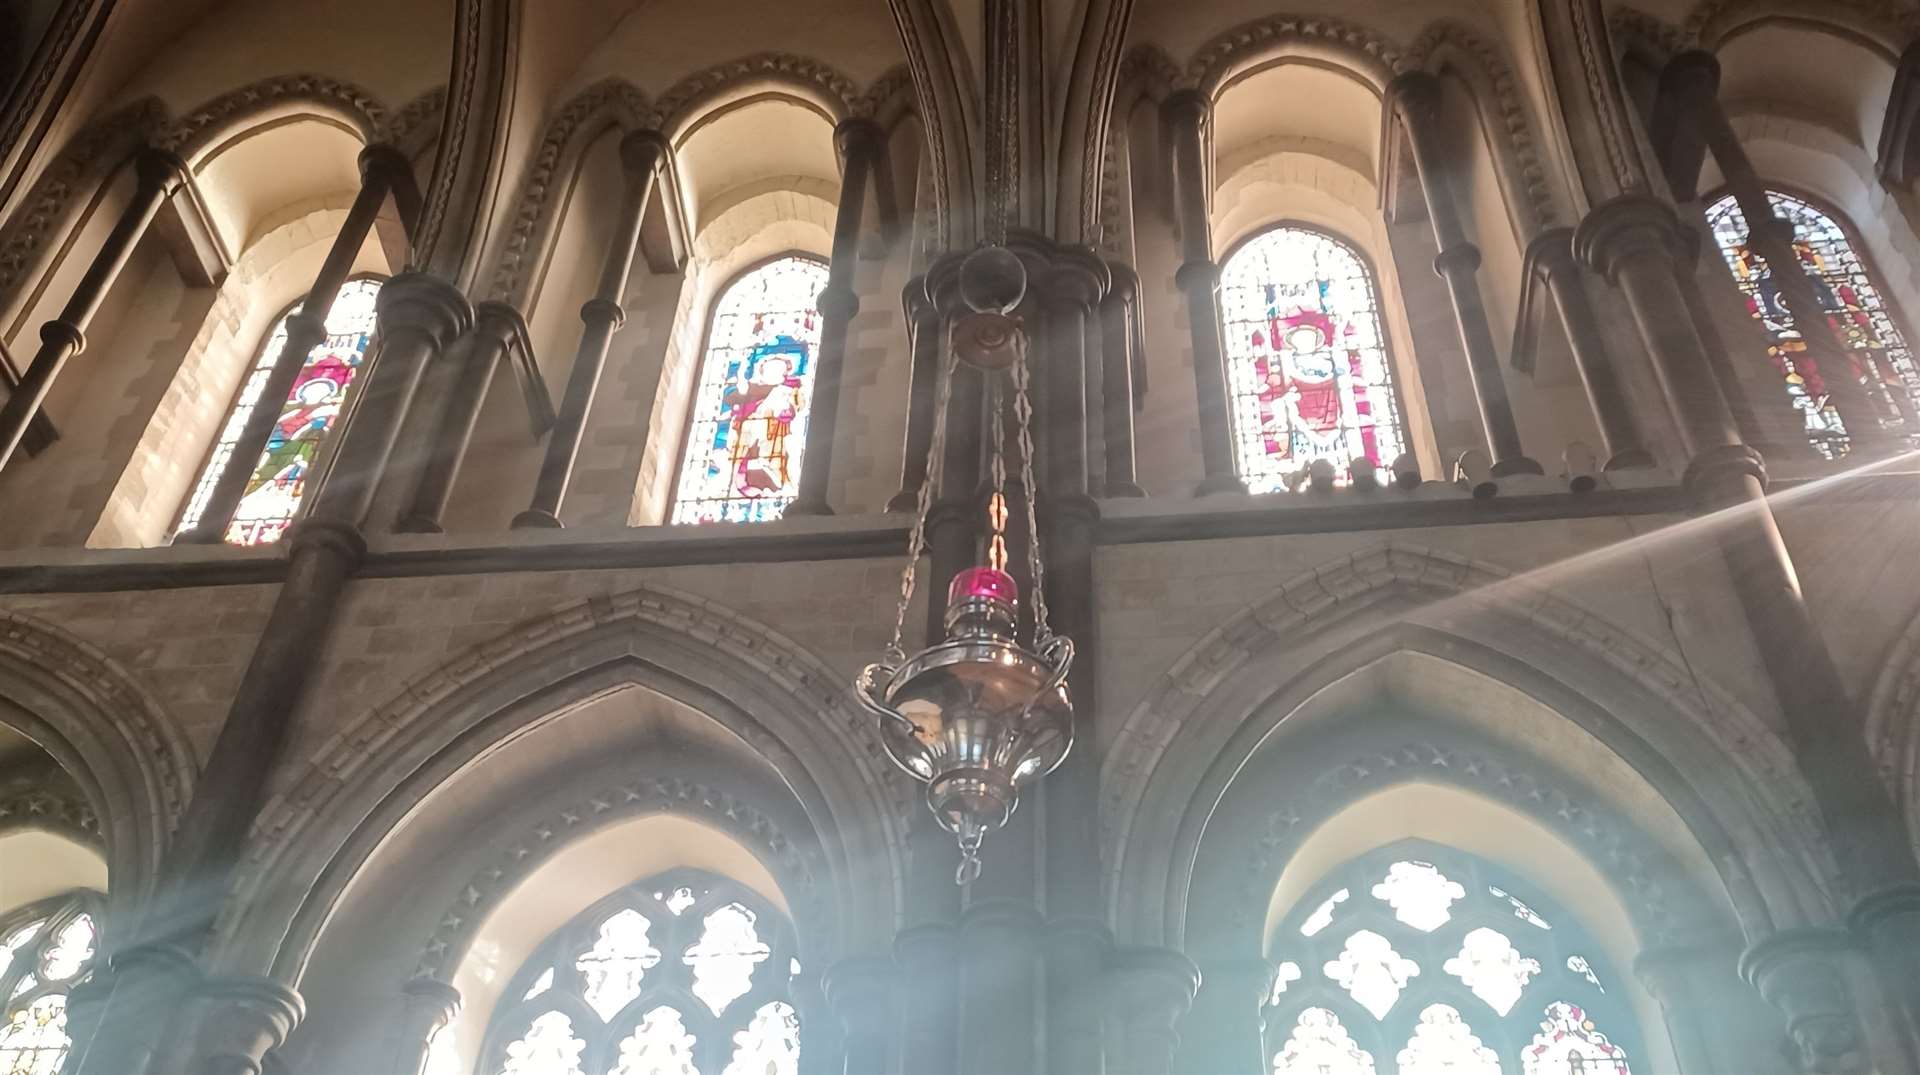 The lamp in The Sanctuary